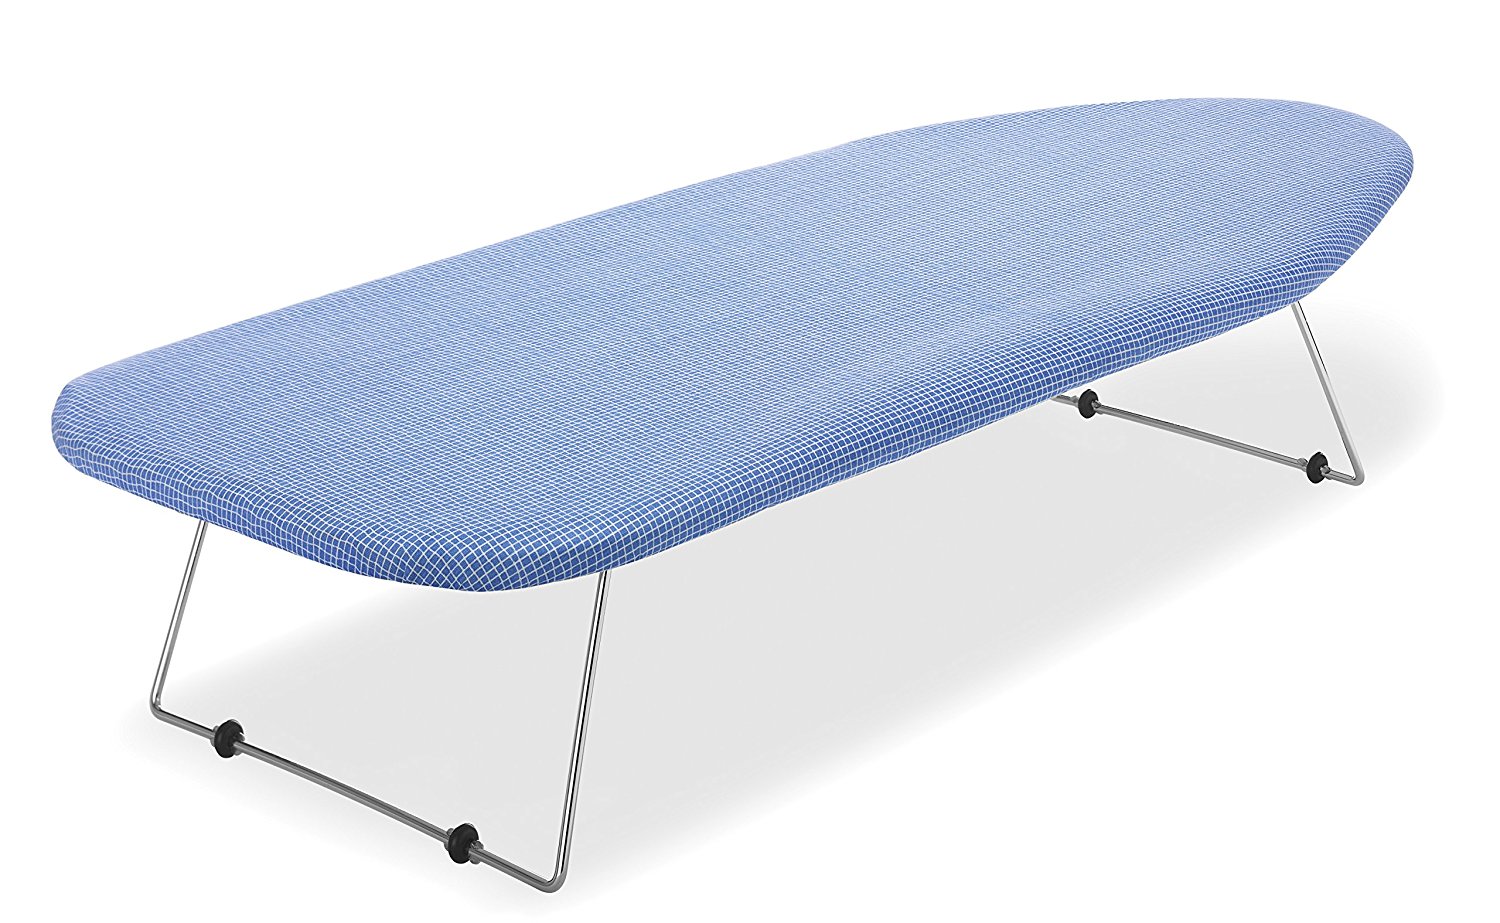 ironing board large with Scorch Resistant Cover